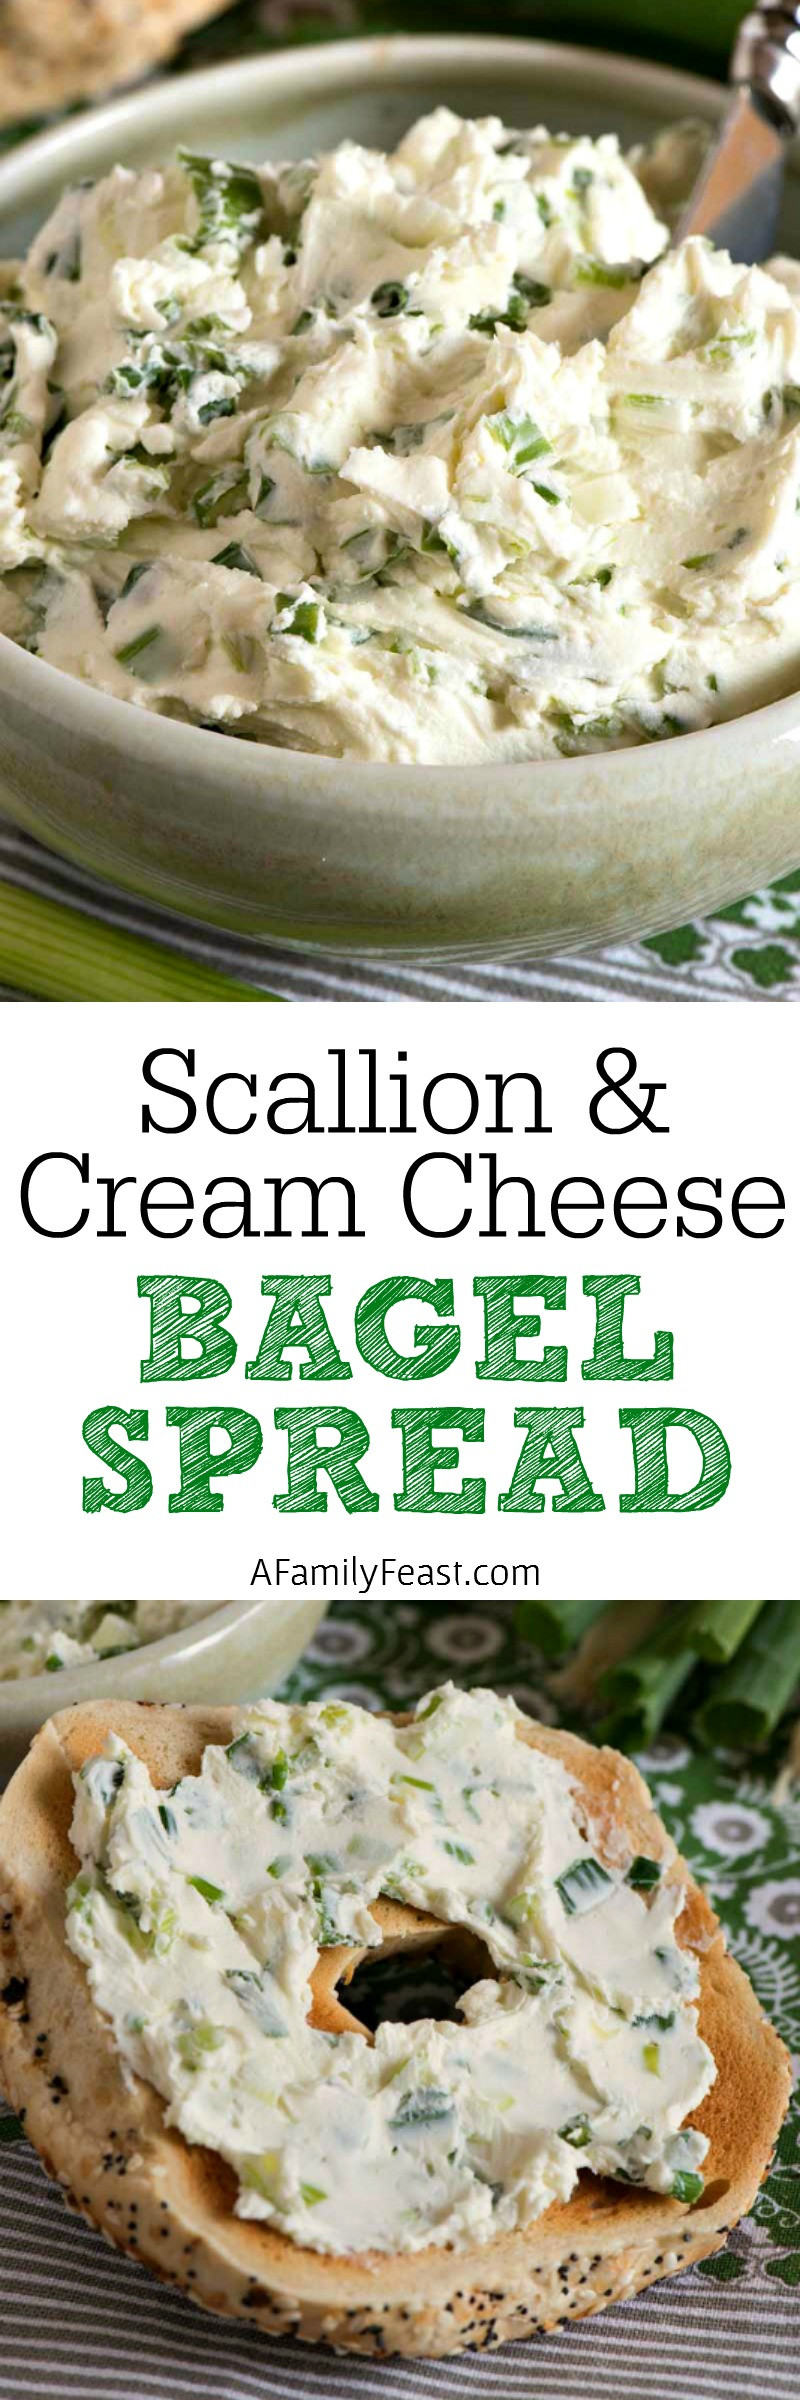 Cream Cheese Spread For Bagels
 Scallion Cream Cheese Bagel Spread A Family Feast